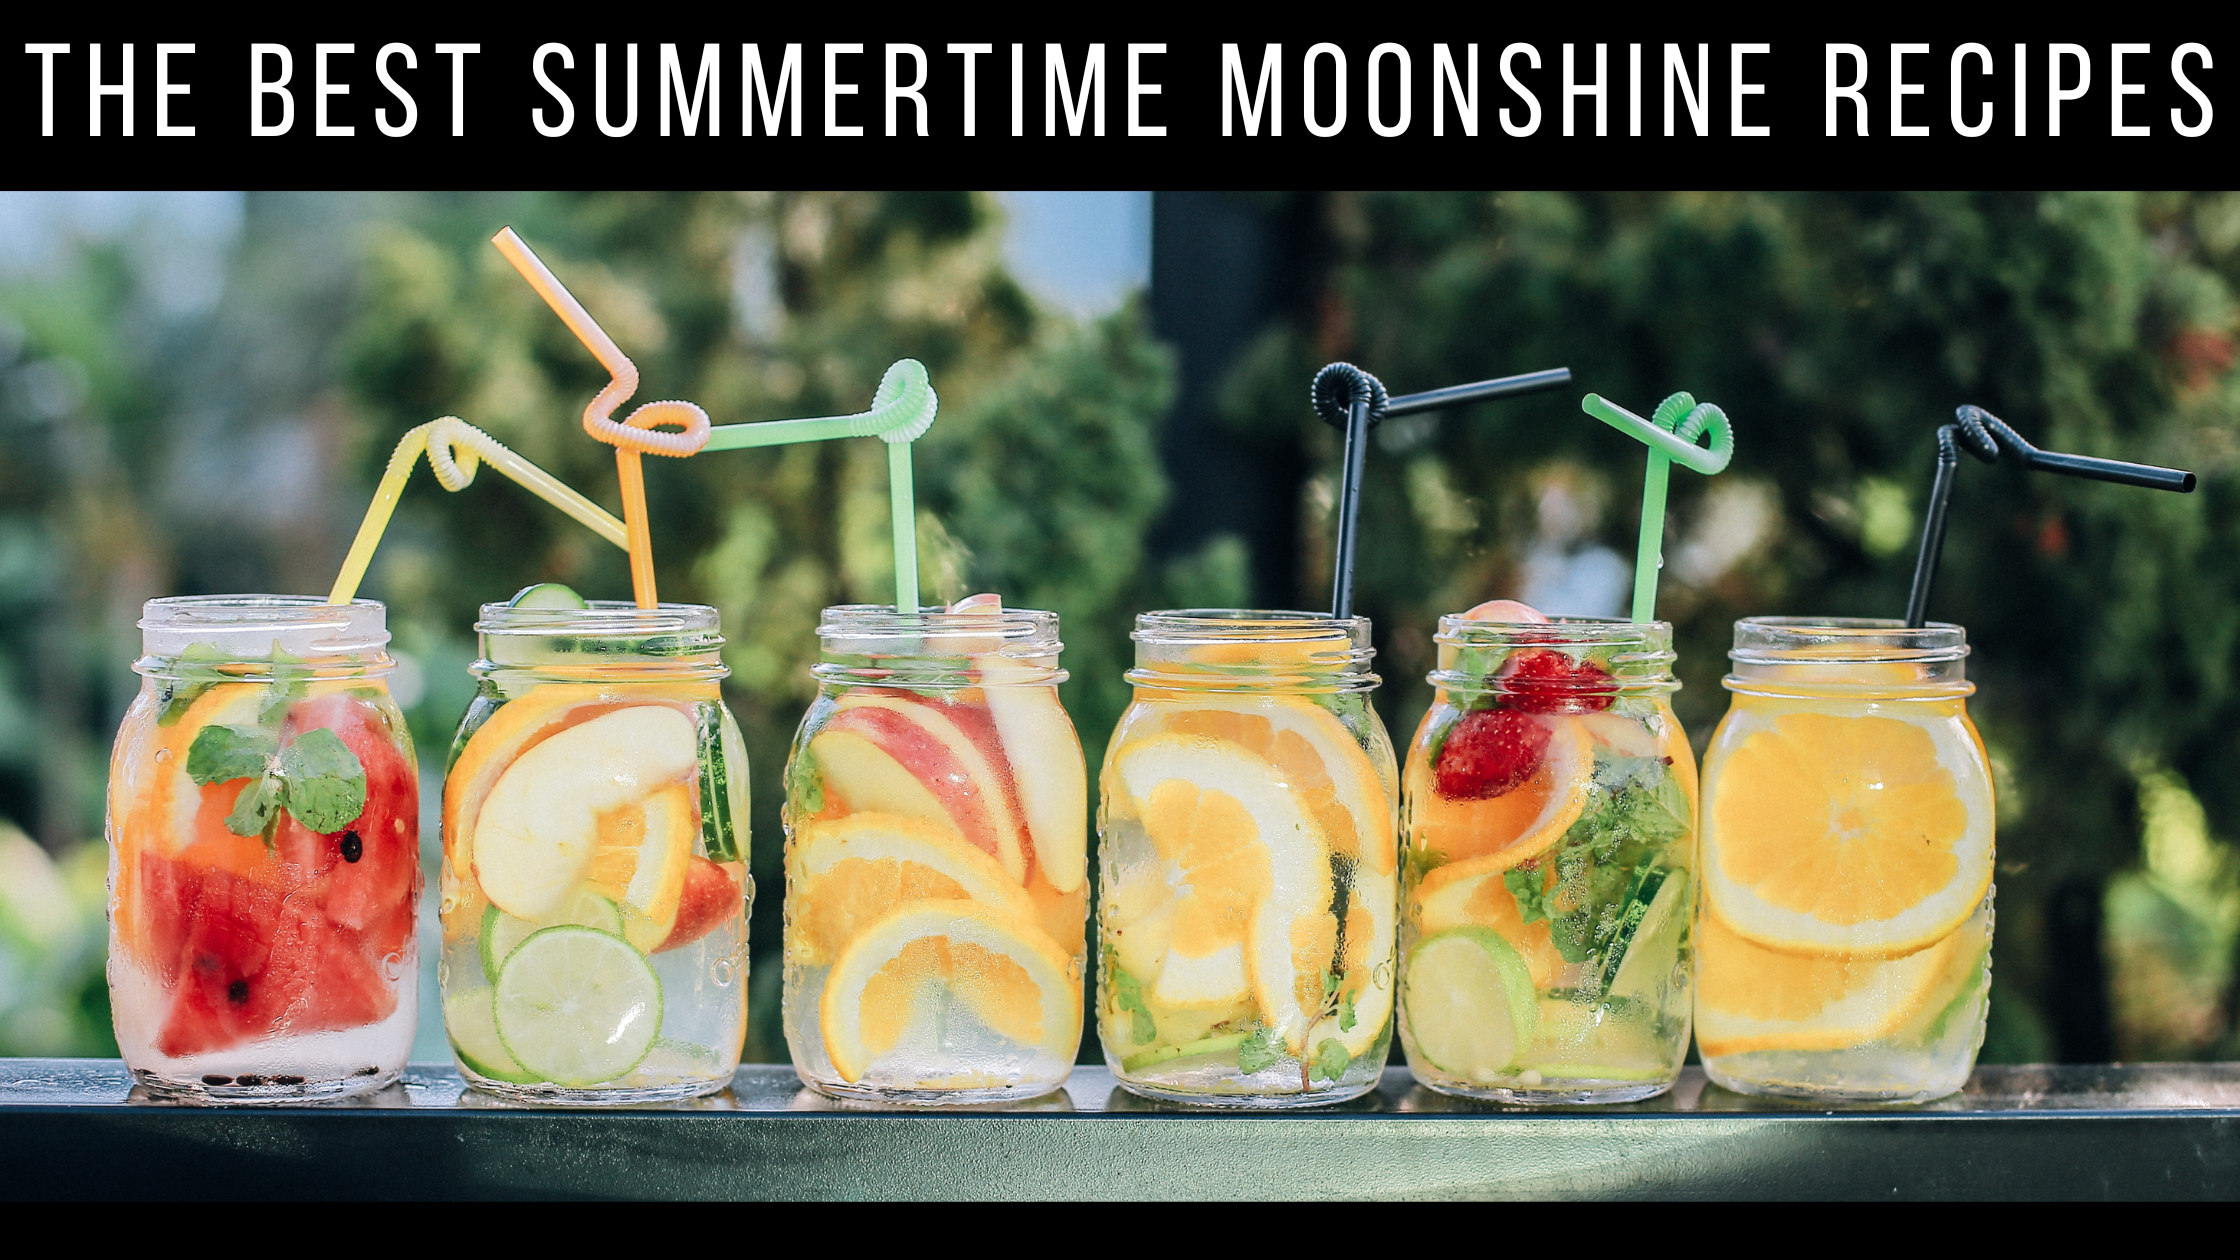 What's your favorite summer drink? #shopthelook